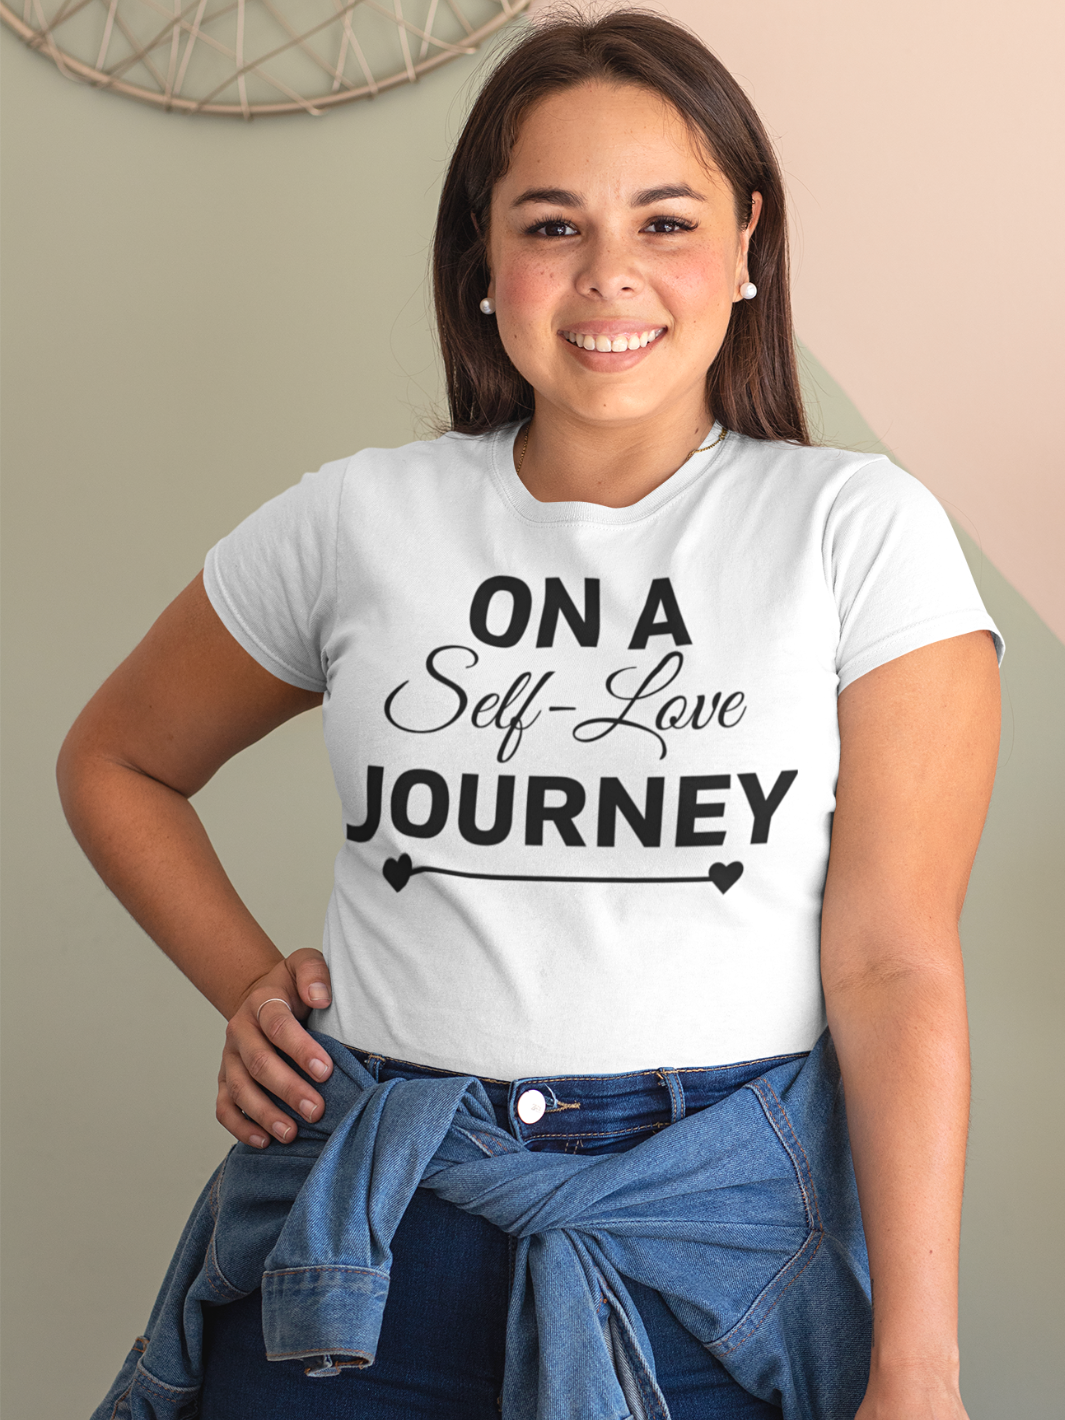 ON A SELF-LOVE JOURNEY T-Shirt